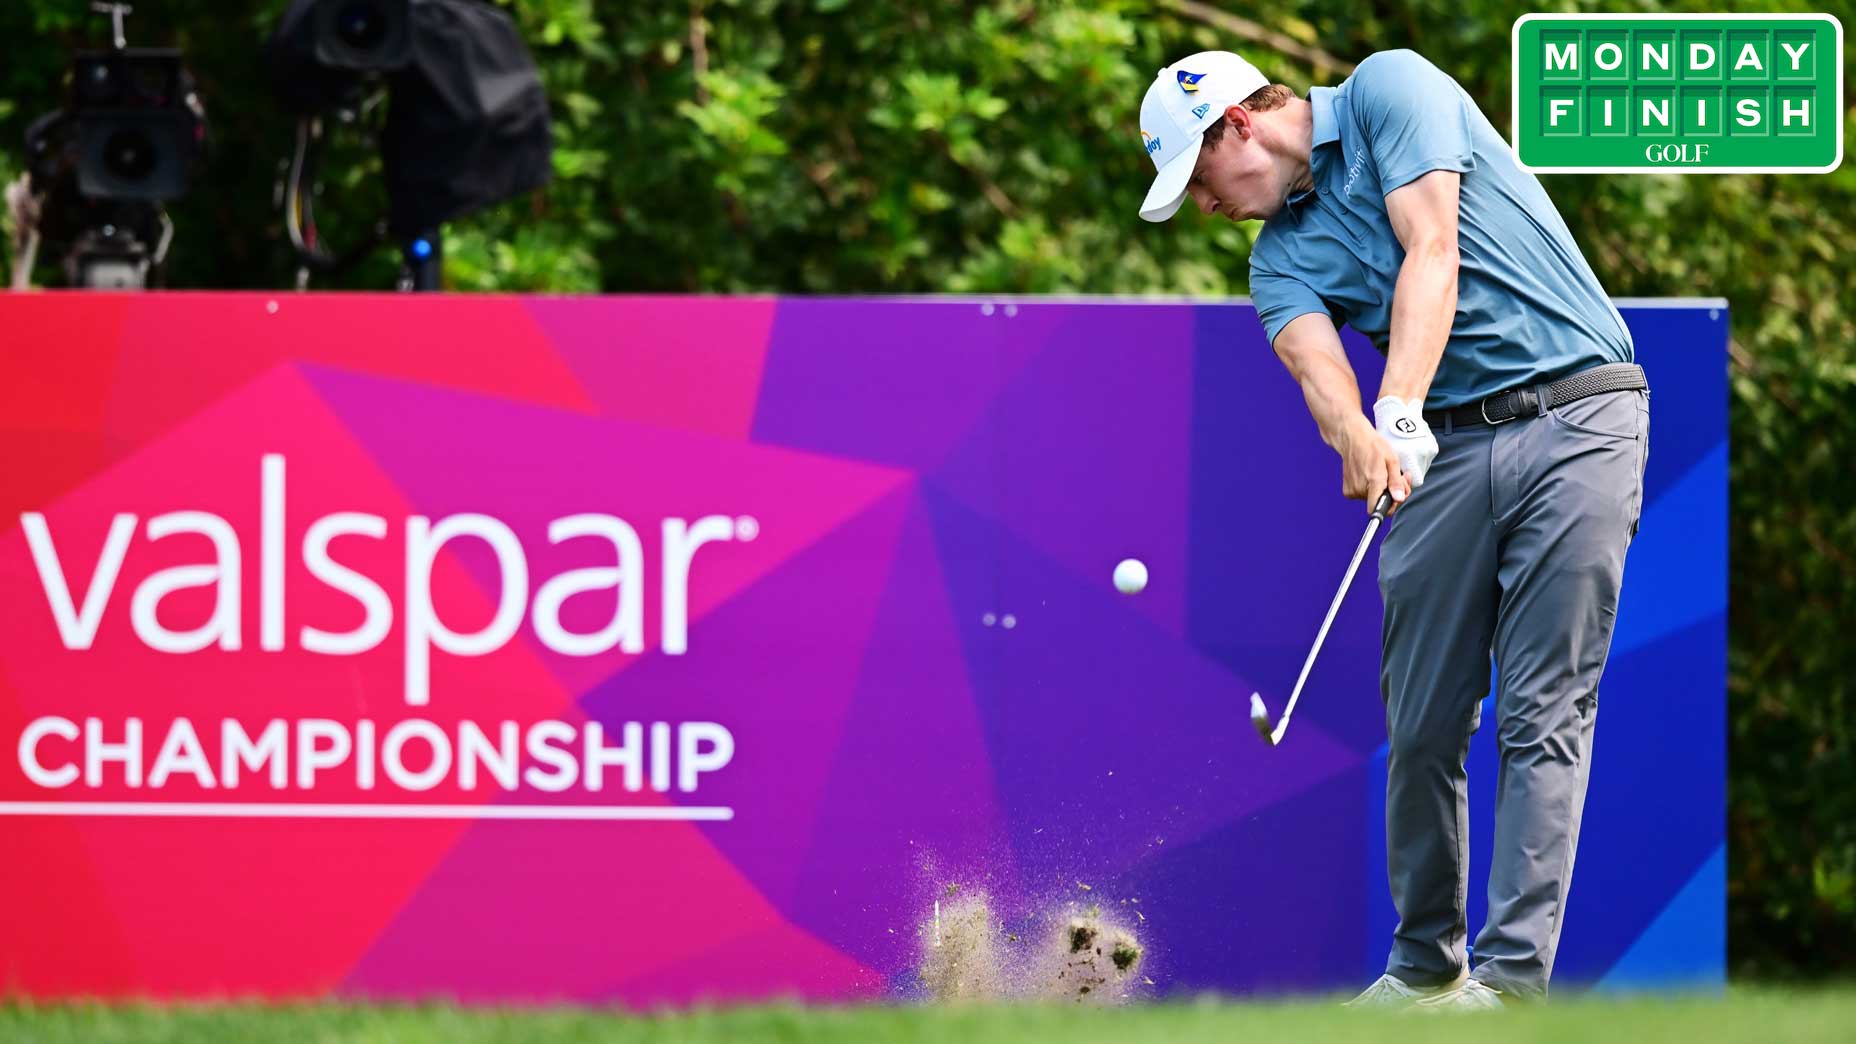 2021 Valspar Championship leaderboard Who’s contending after round 1